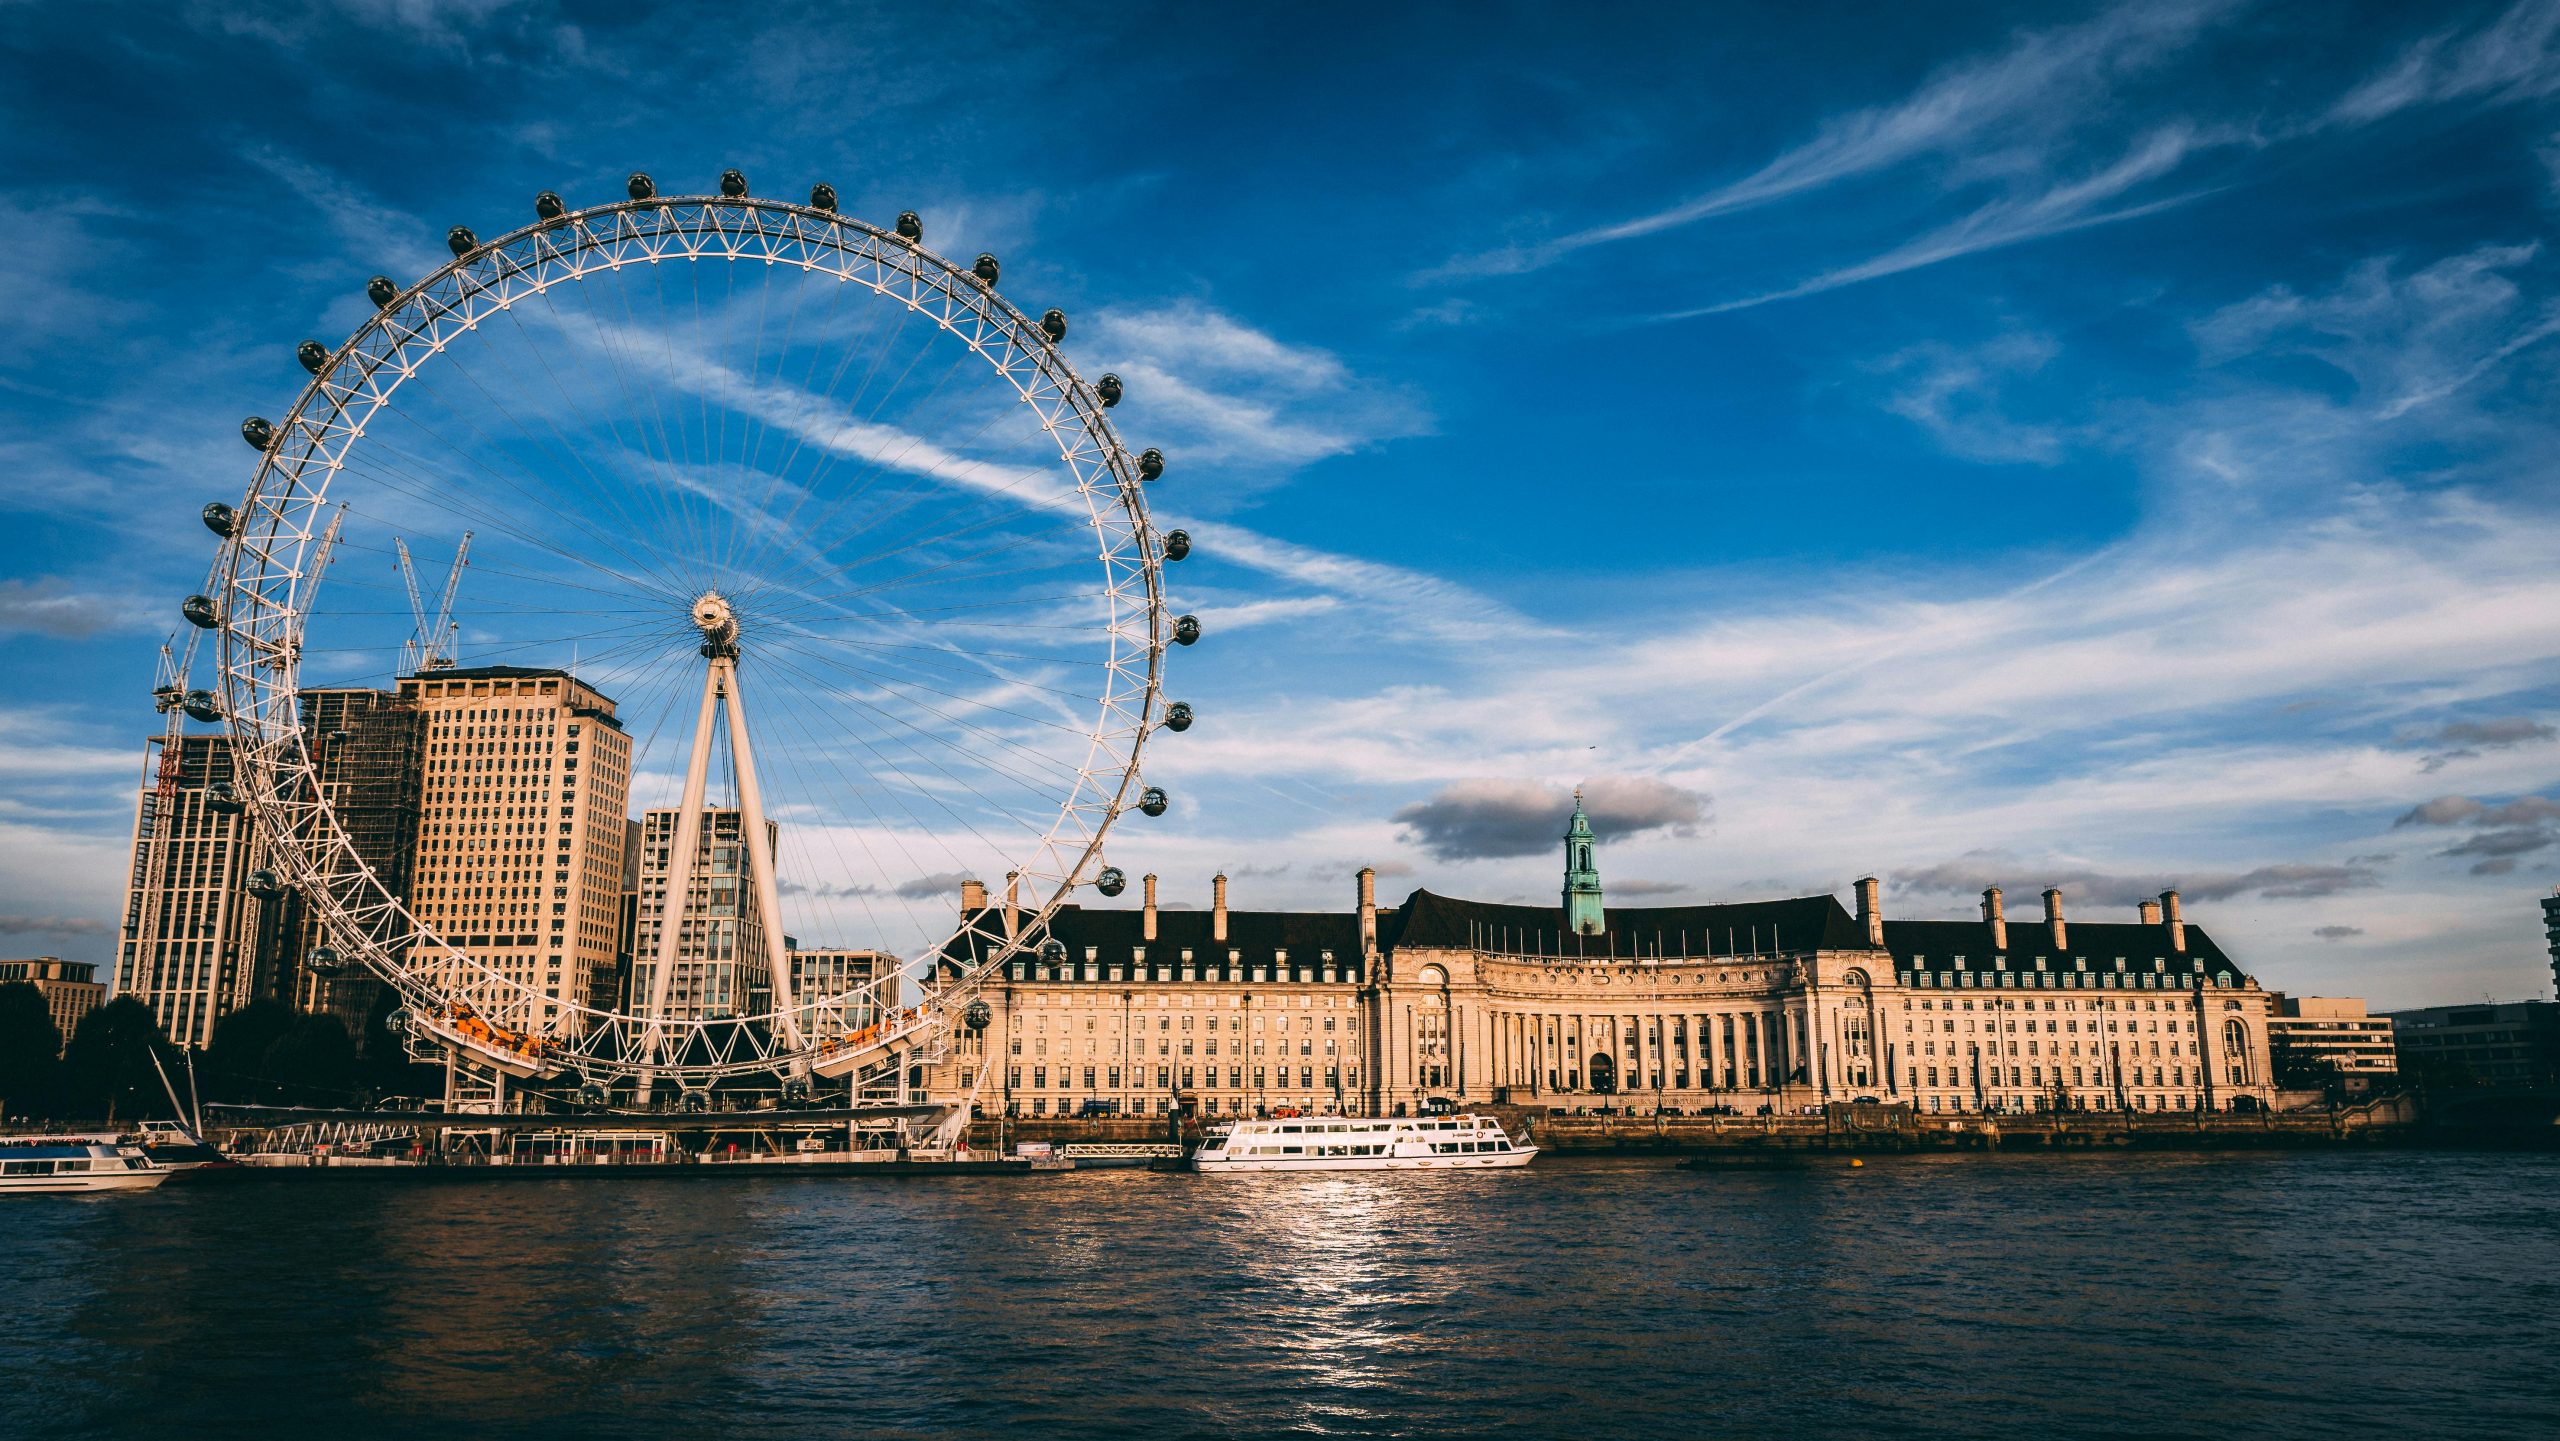 An All-Inclusive Travel Guide to Experience the Best of London